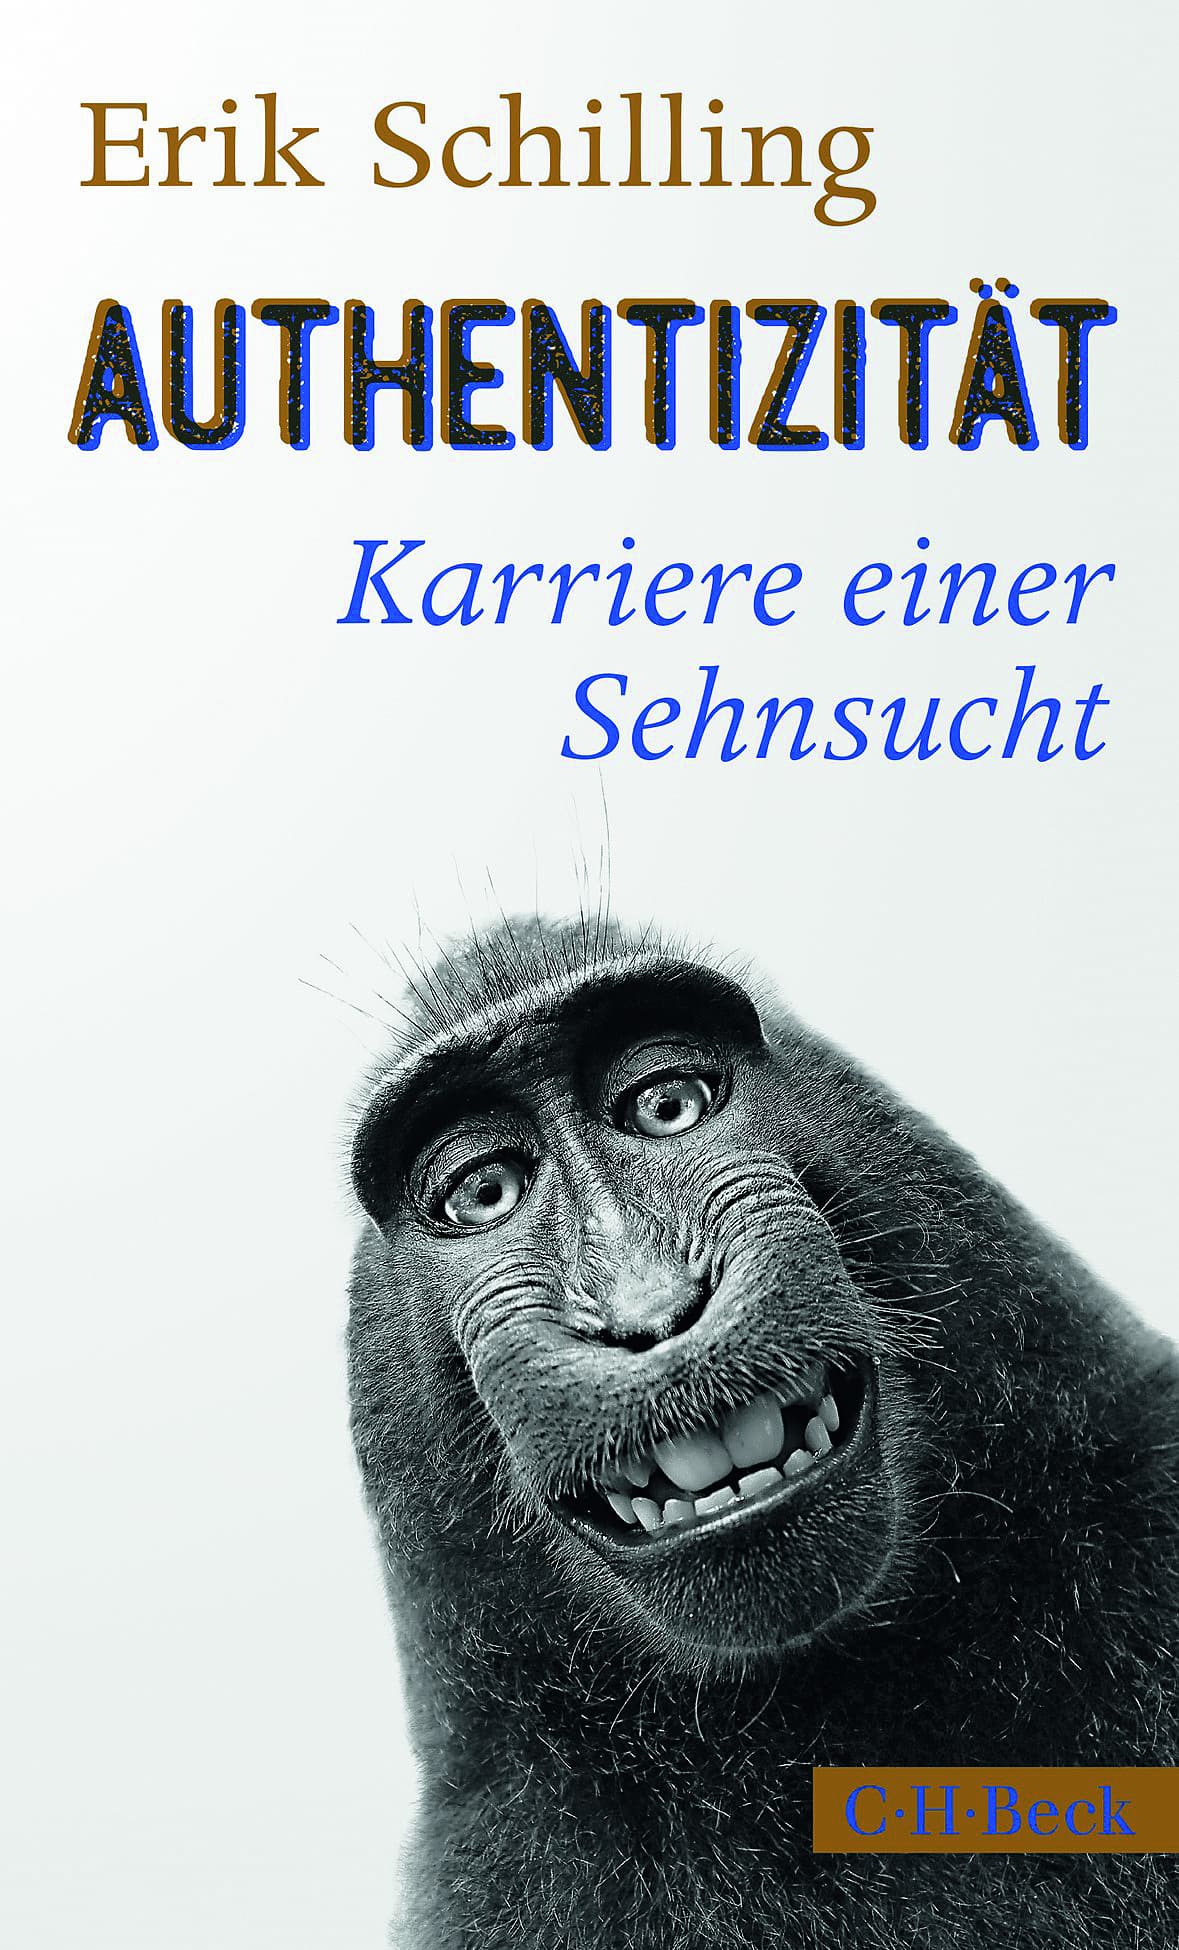 Book review on "Authenticity" - a spectrum of science